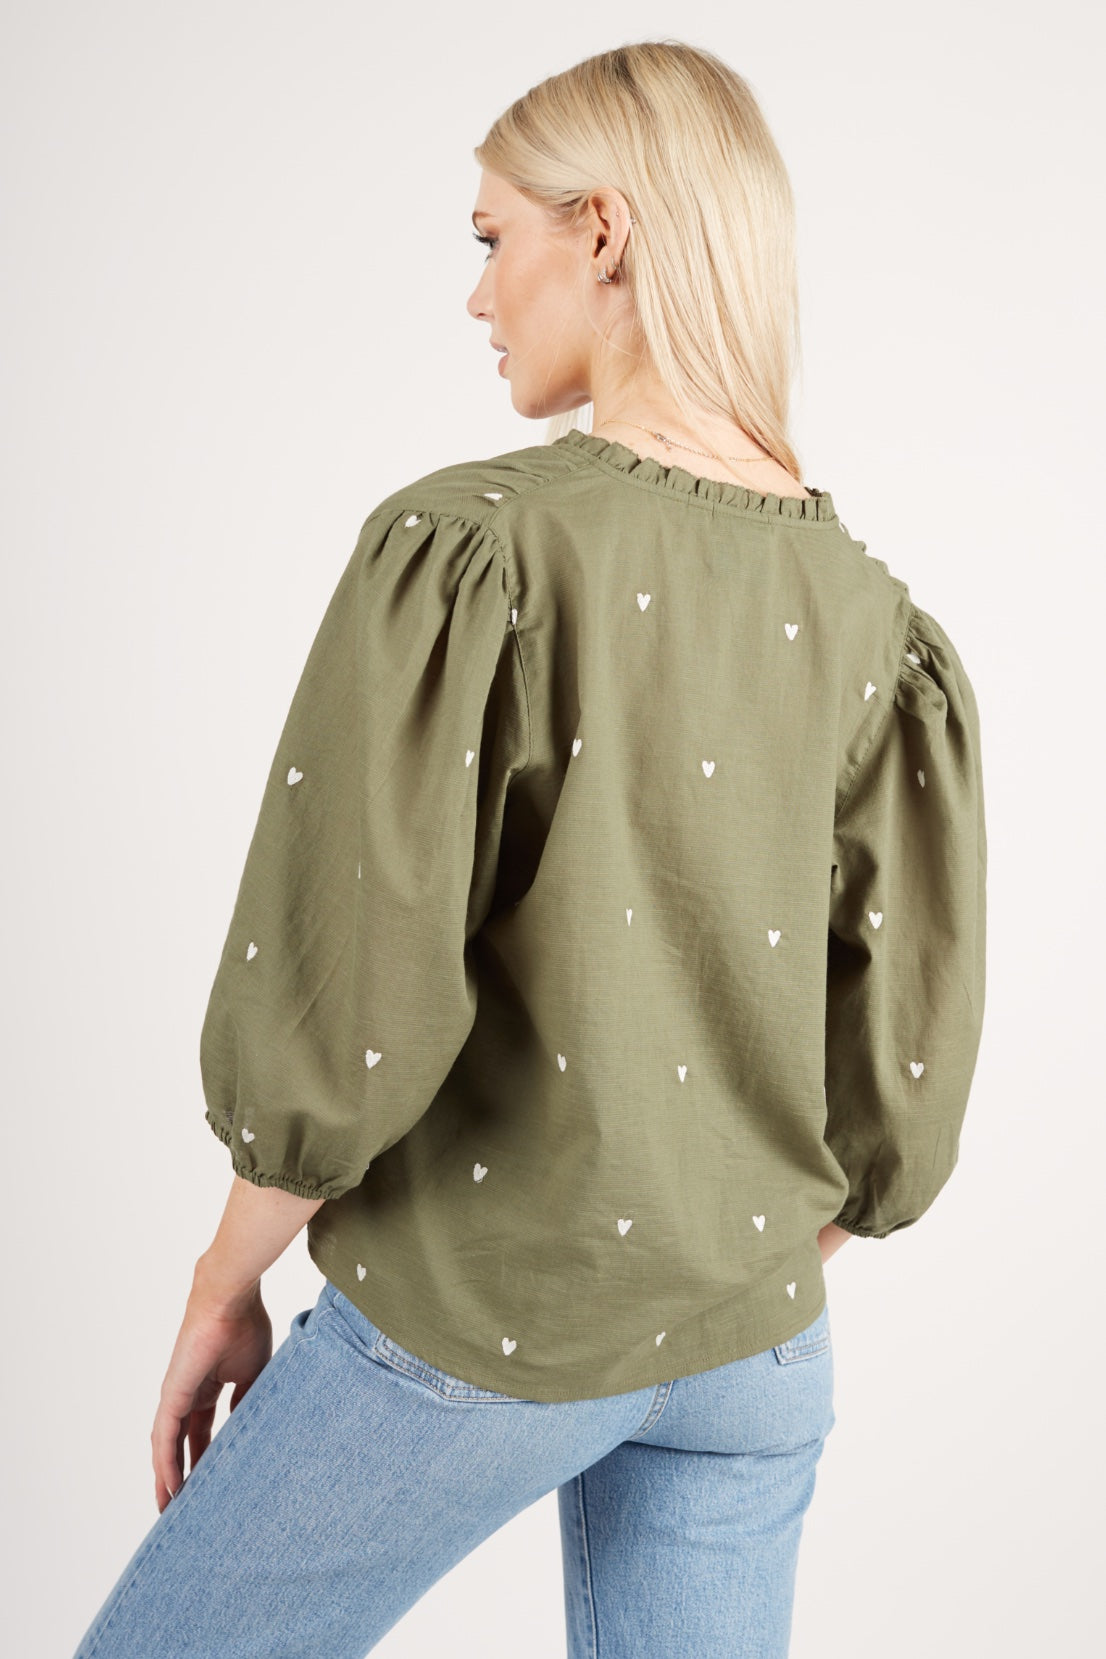 Indie - Heart Embroidered Blouse